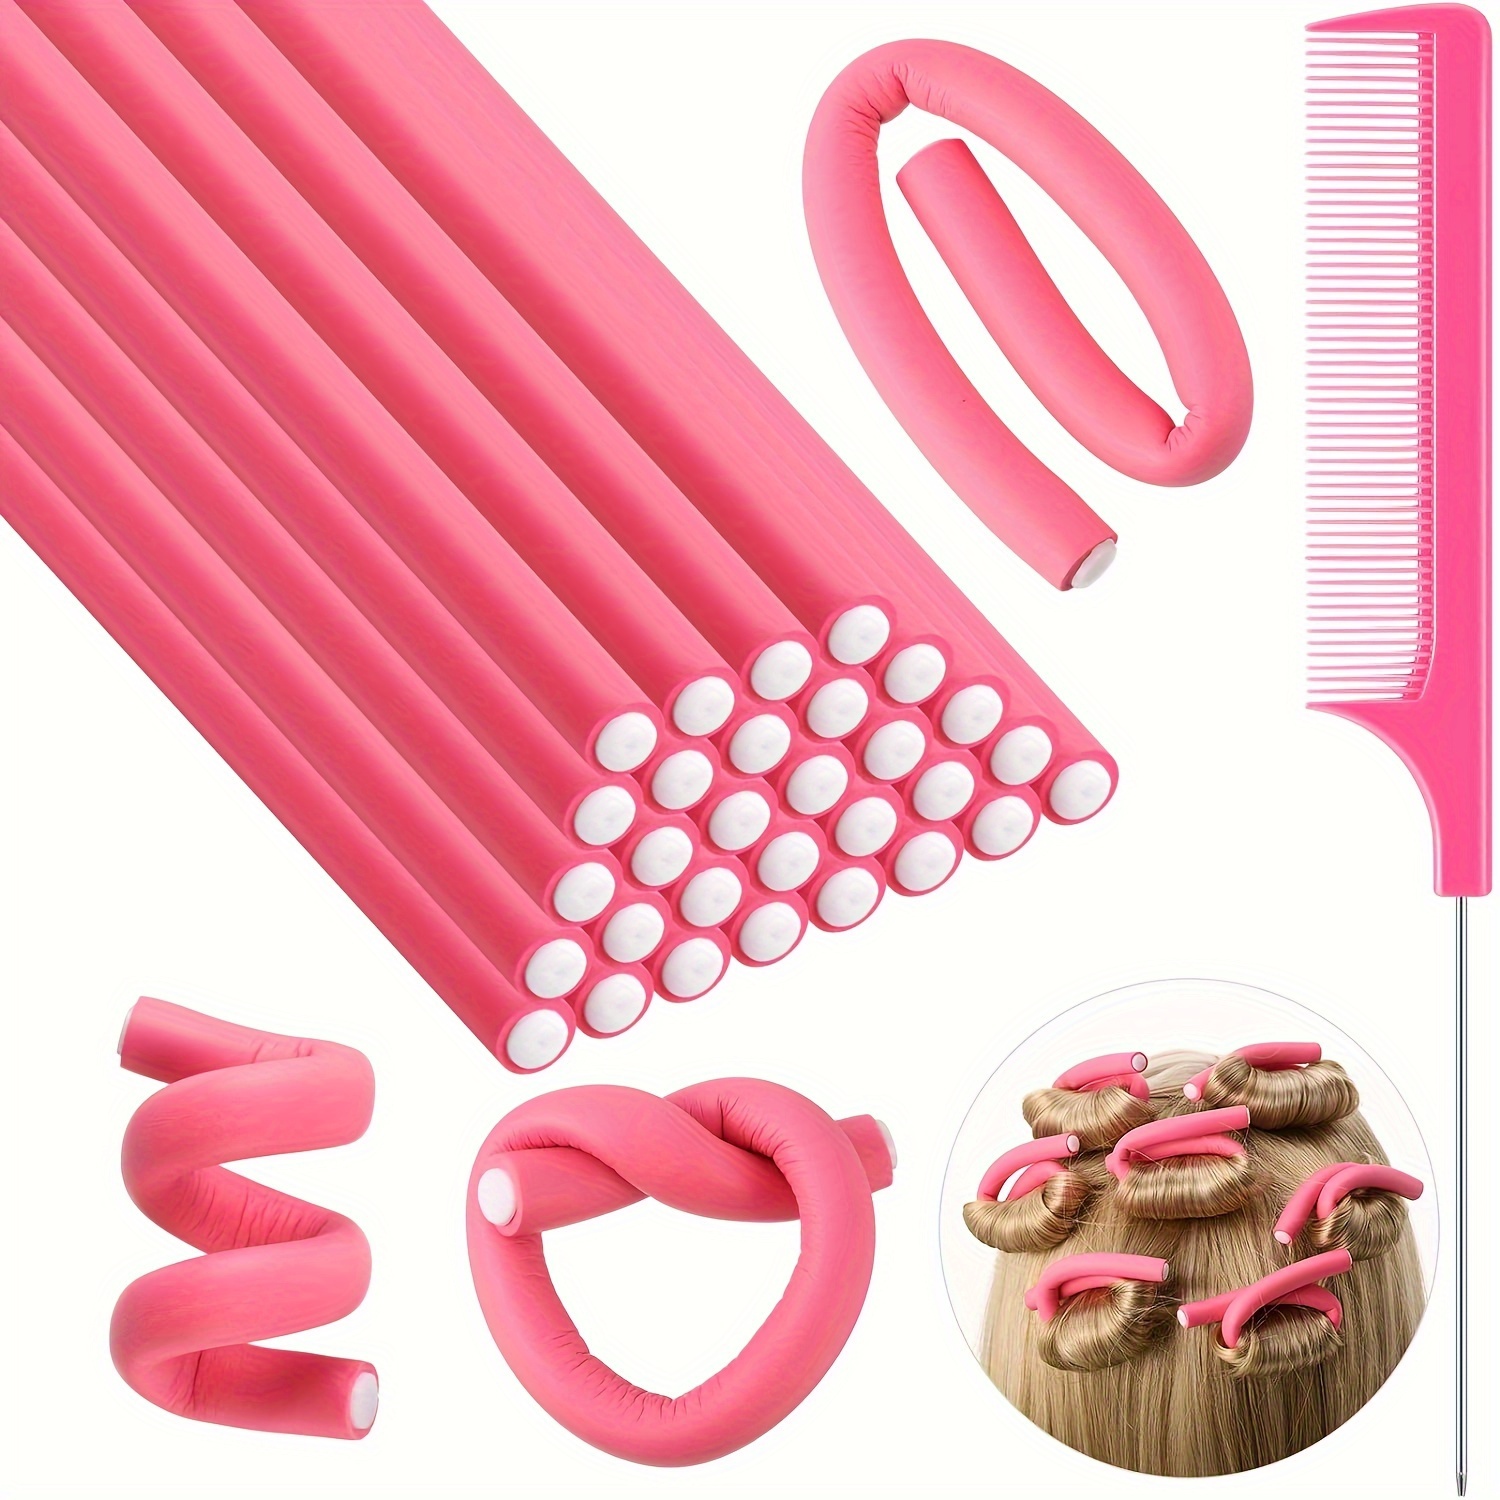 

30pcs Flexible Curling Rods Twist Foam Hair Rollers Soft Foam No Heat Hair Rods Rollers And 1 Steel Pintail Comb Rat Tail Comb For Women Long And Short Hair